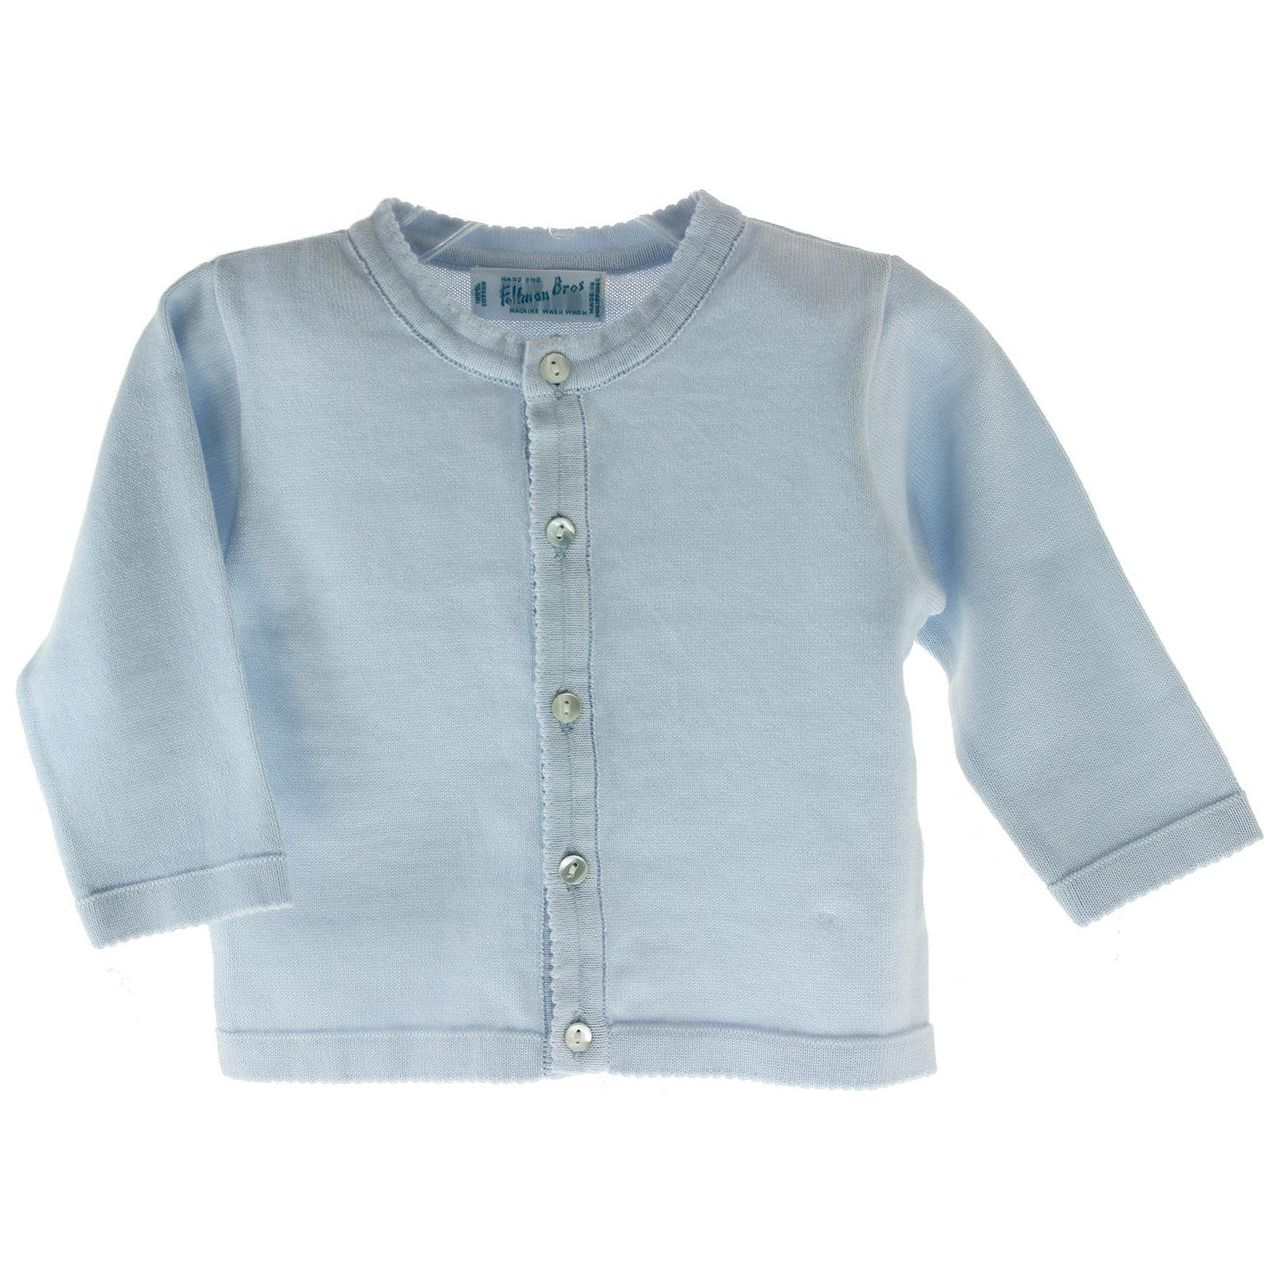 Baby Boys Monogram Sweater Light Blue Crewneck Knitted - Hiccups